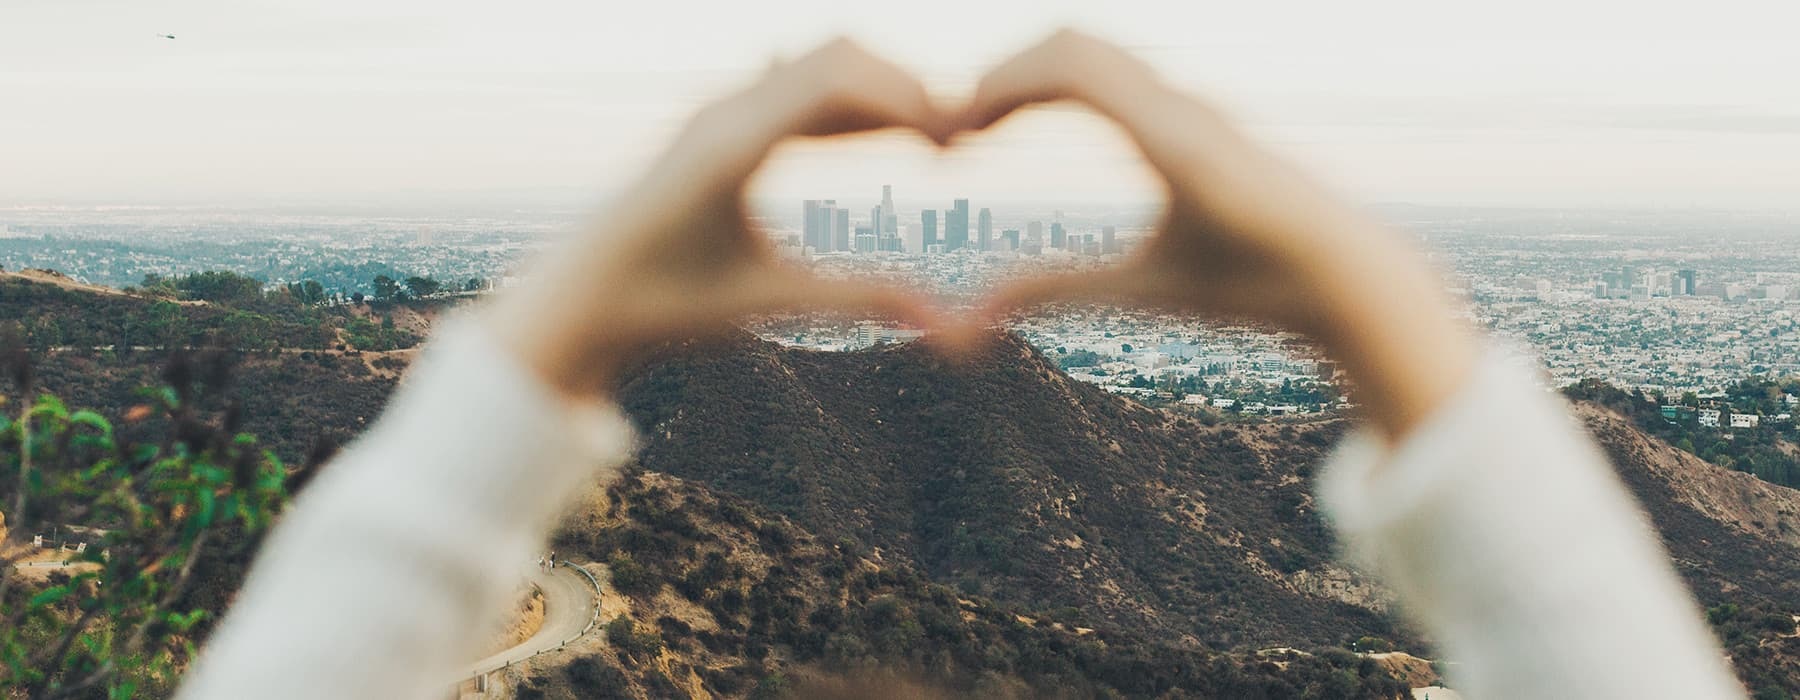 lifestyle image of hands making a heart shape with the distant city in the background